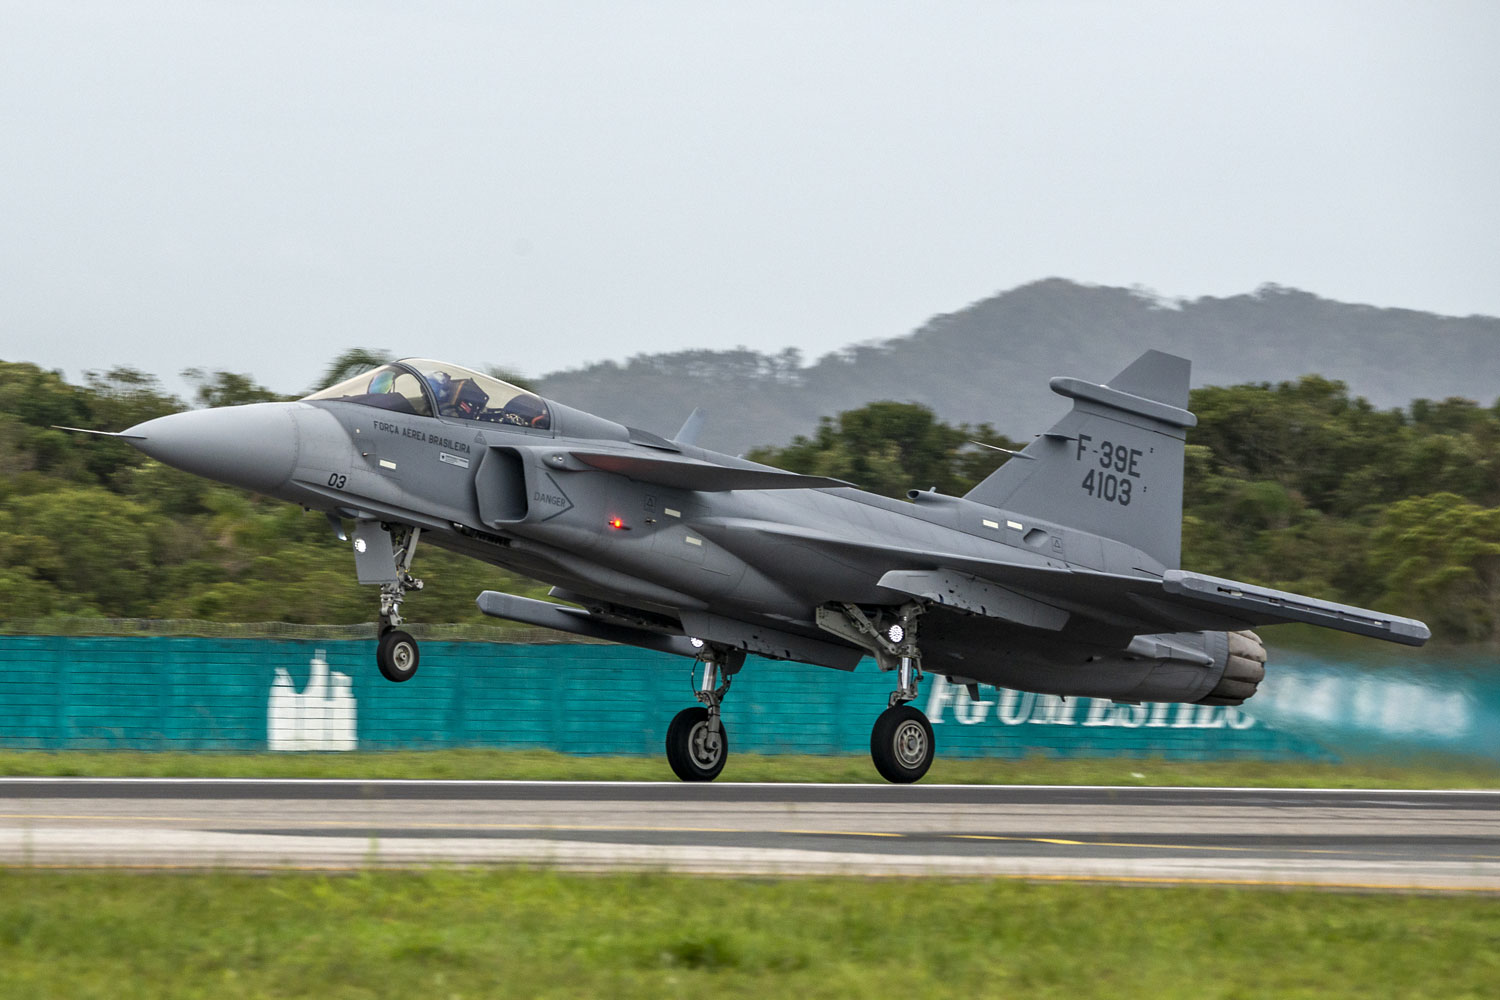 First of 36 Saab F-39E Gripen fighter aircraft arrives in Brazil